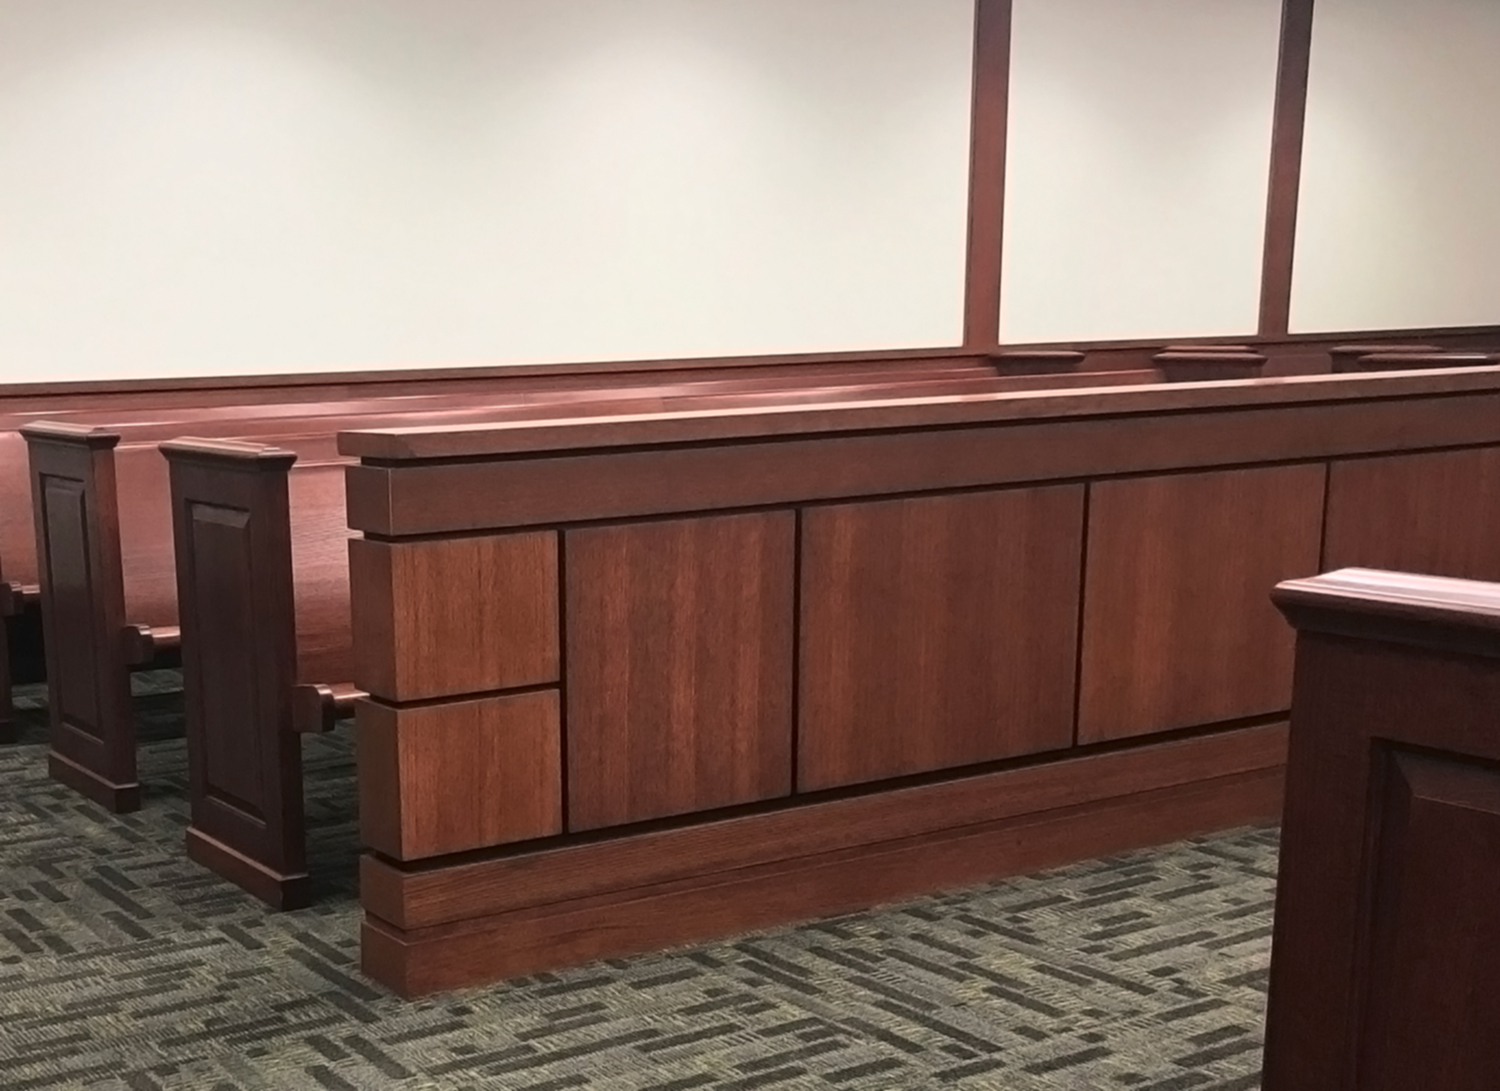 Frontal for Courtroom Benches